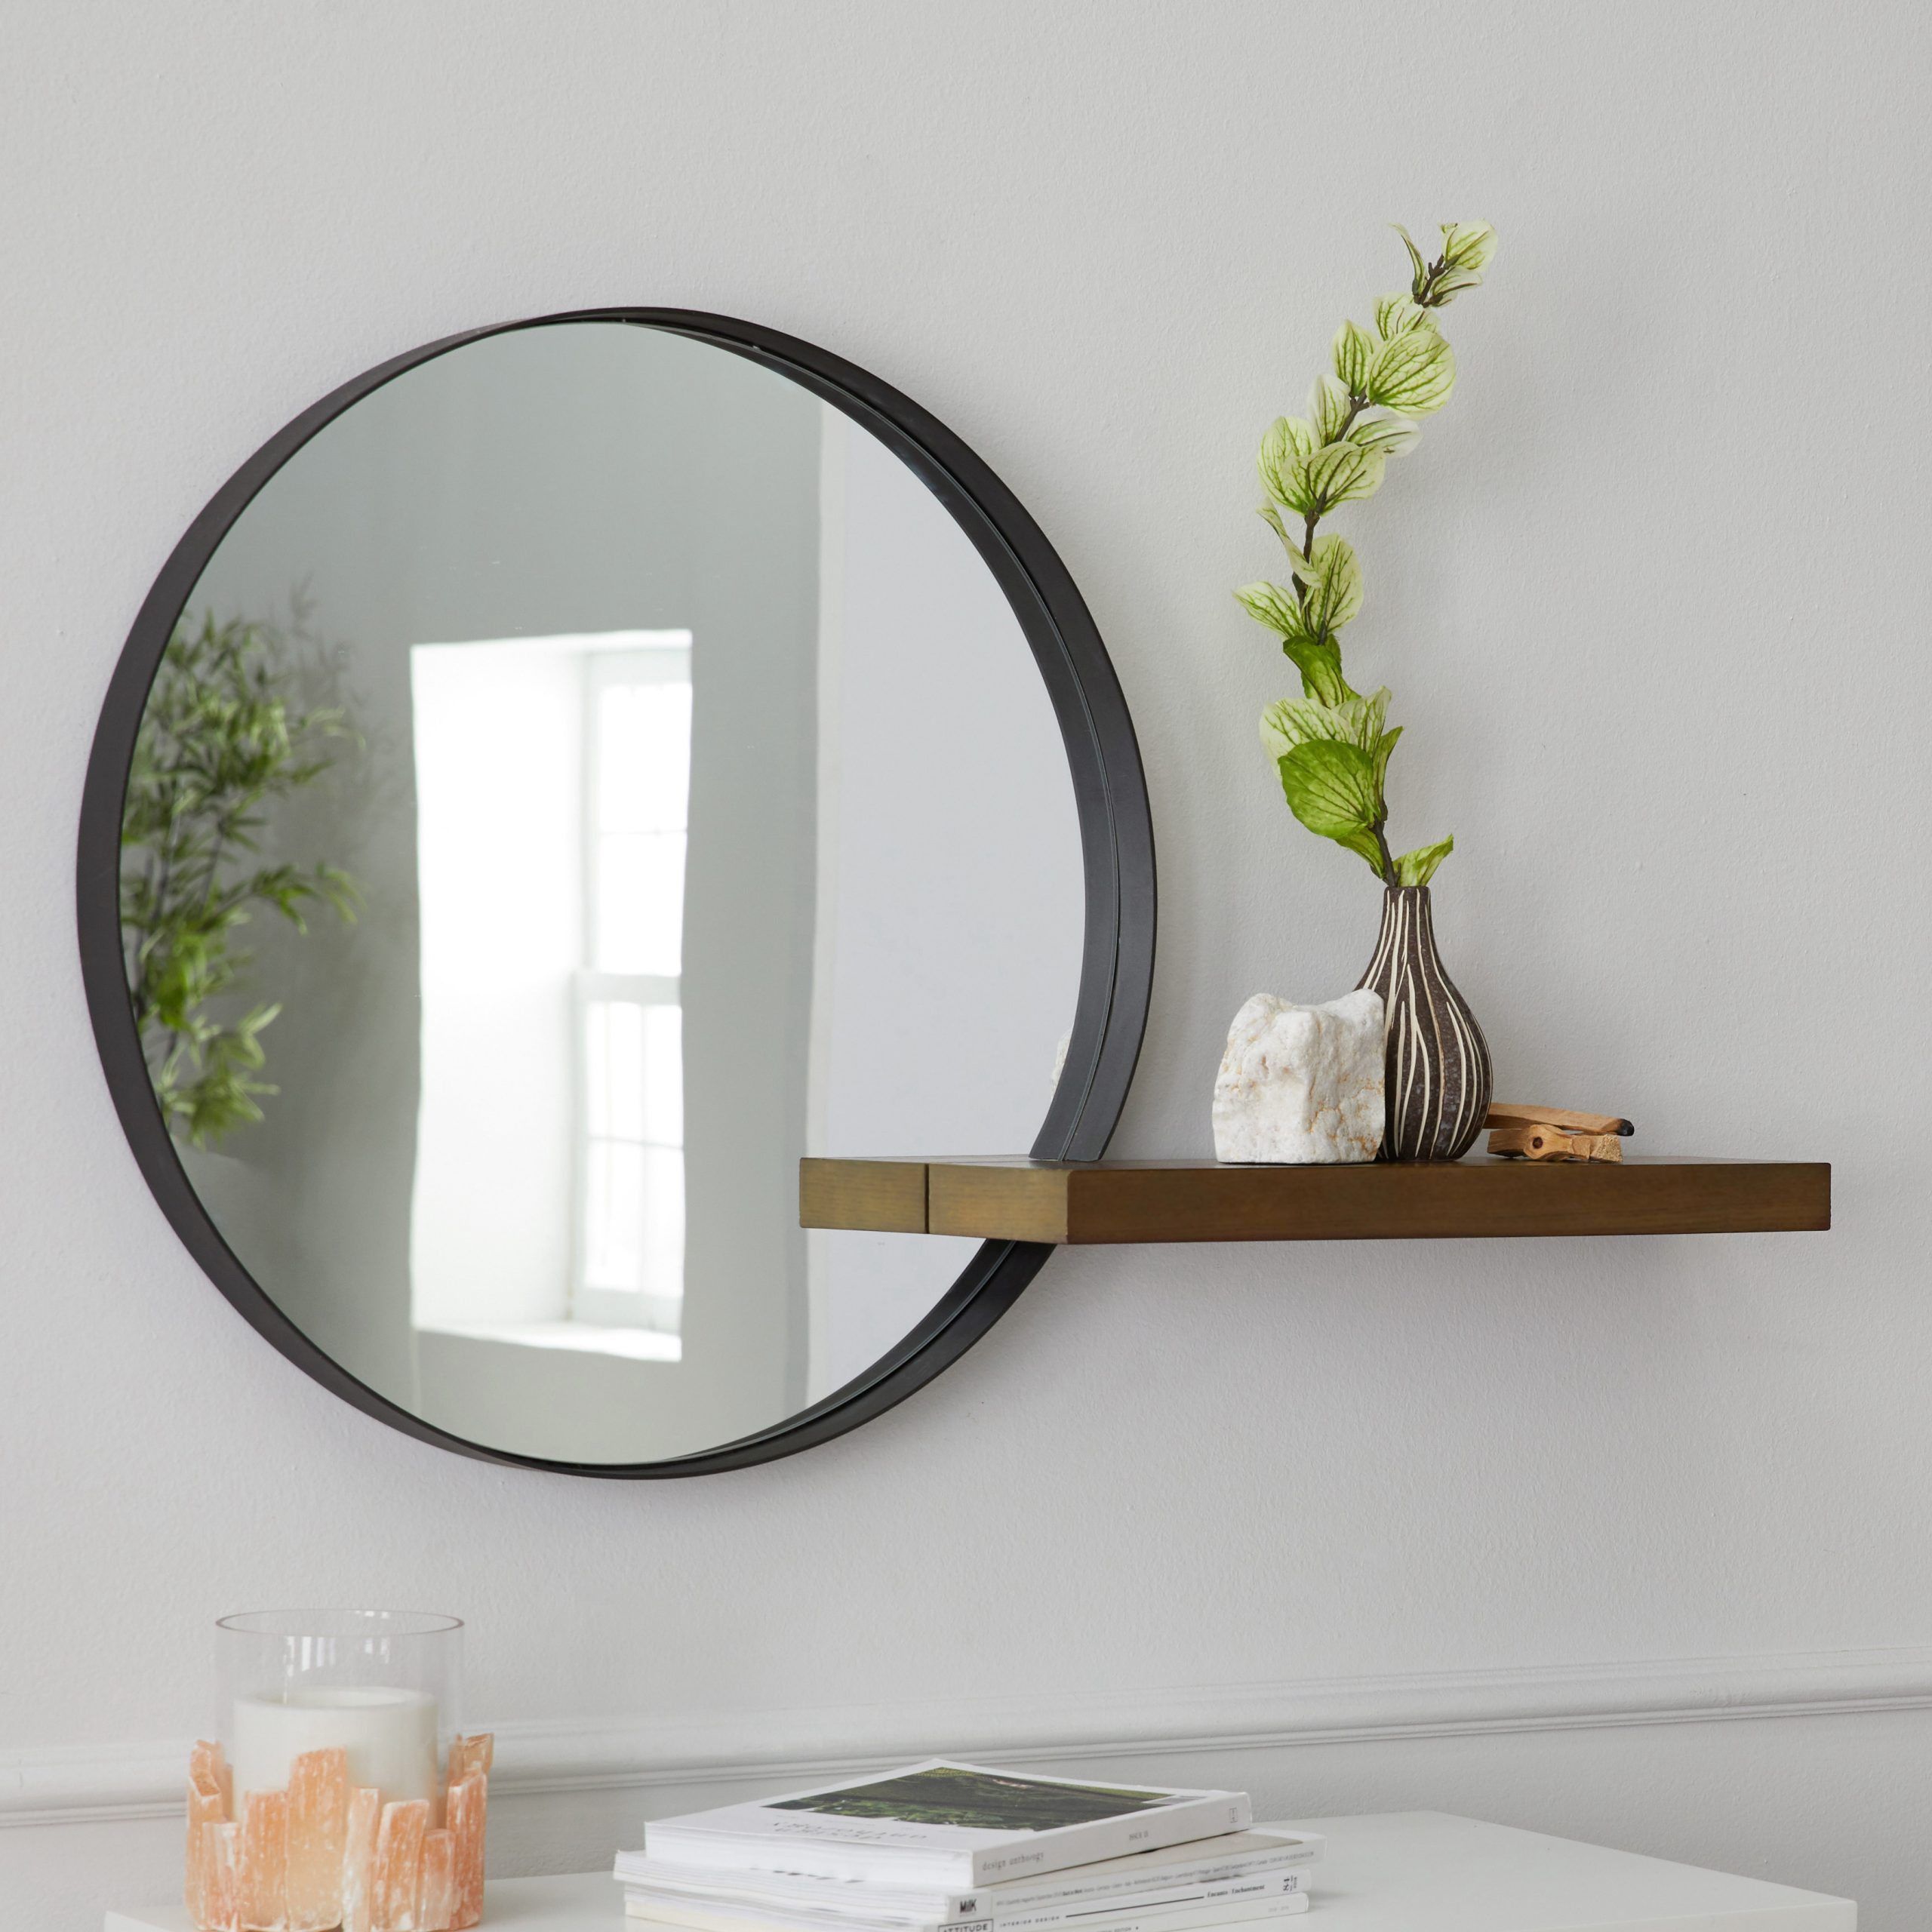 Modrn Naturals Metal Framed Round Decorative Wall Mirror With Wood With Reba Accent Wall Mirrors (View 2 of 15)